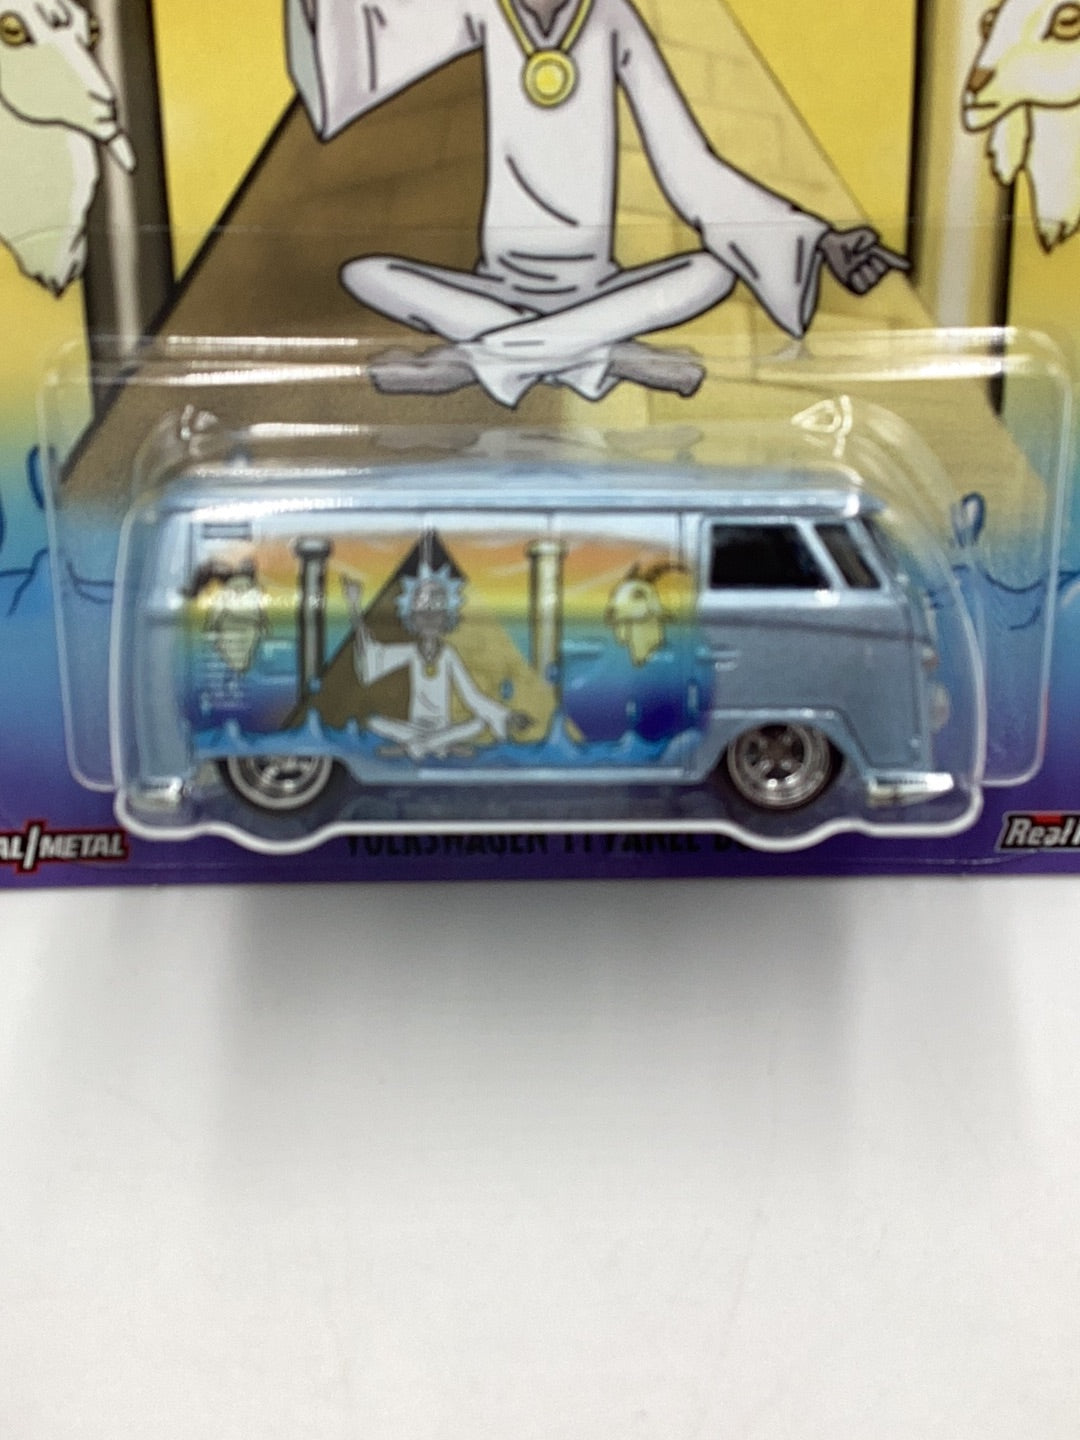 Hot wheels pop culture Rick and Morty 5/5 Volkswagen T1 Panel Bus has crease on card 269G